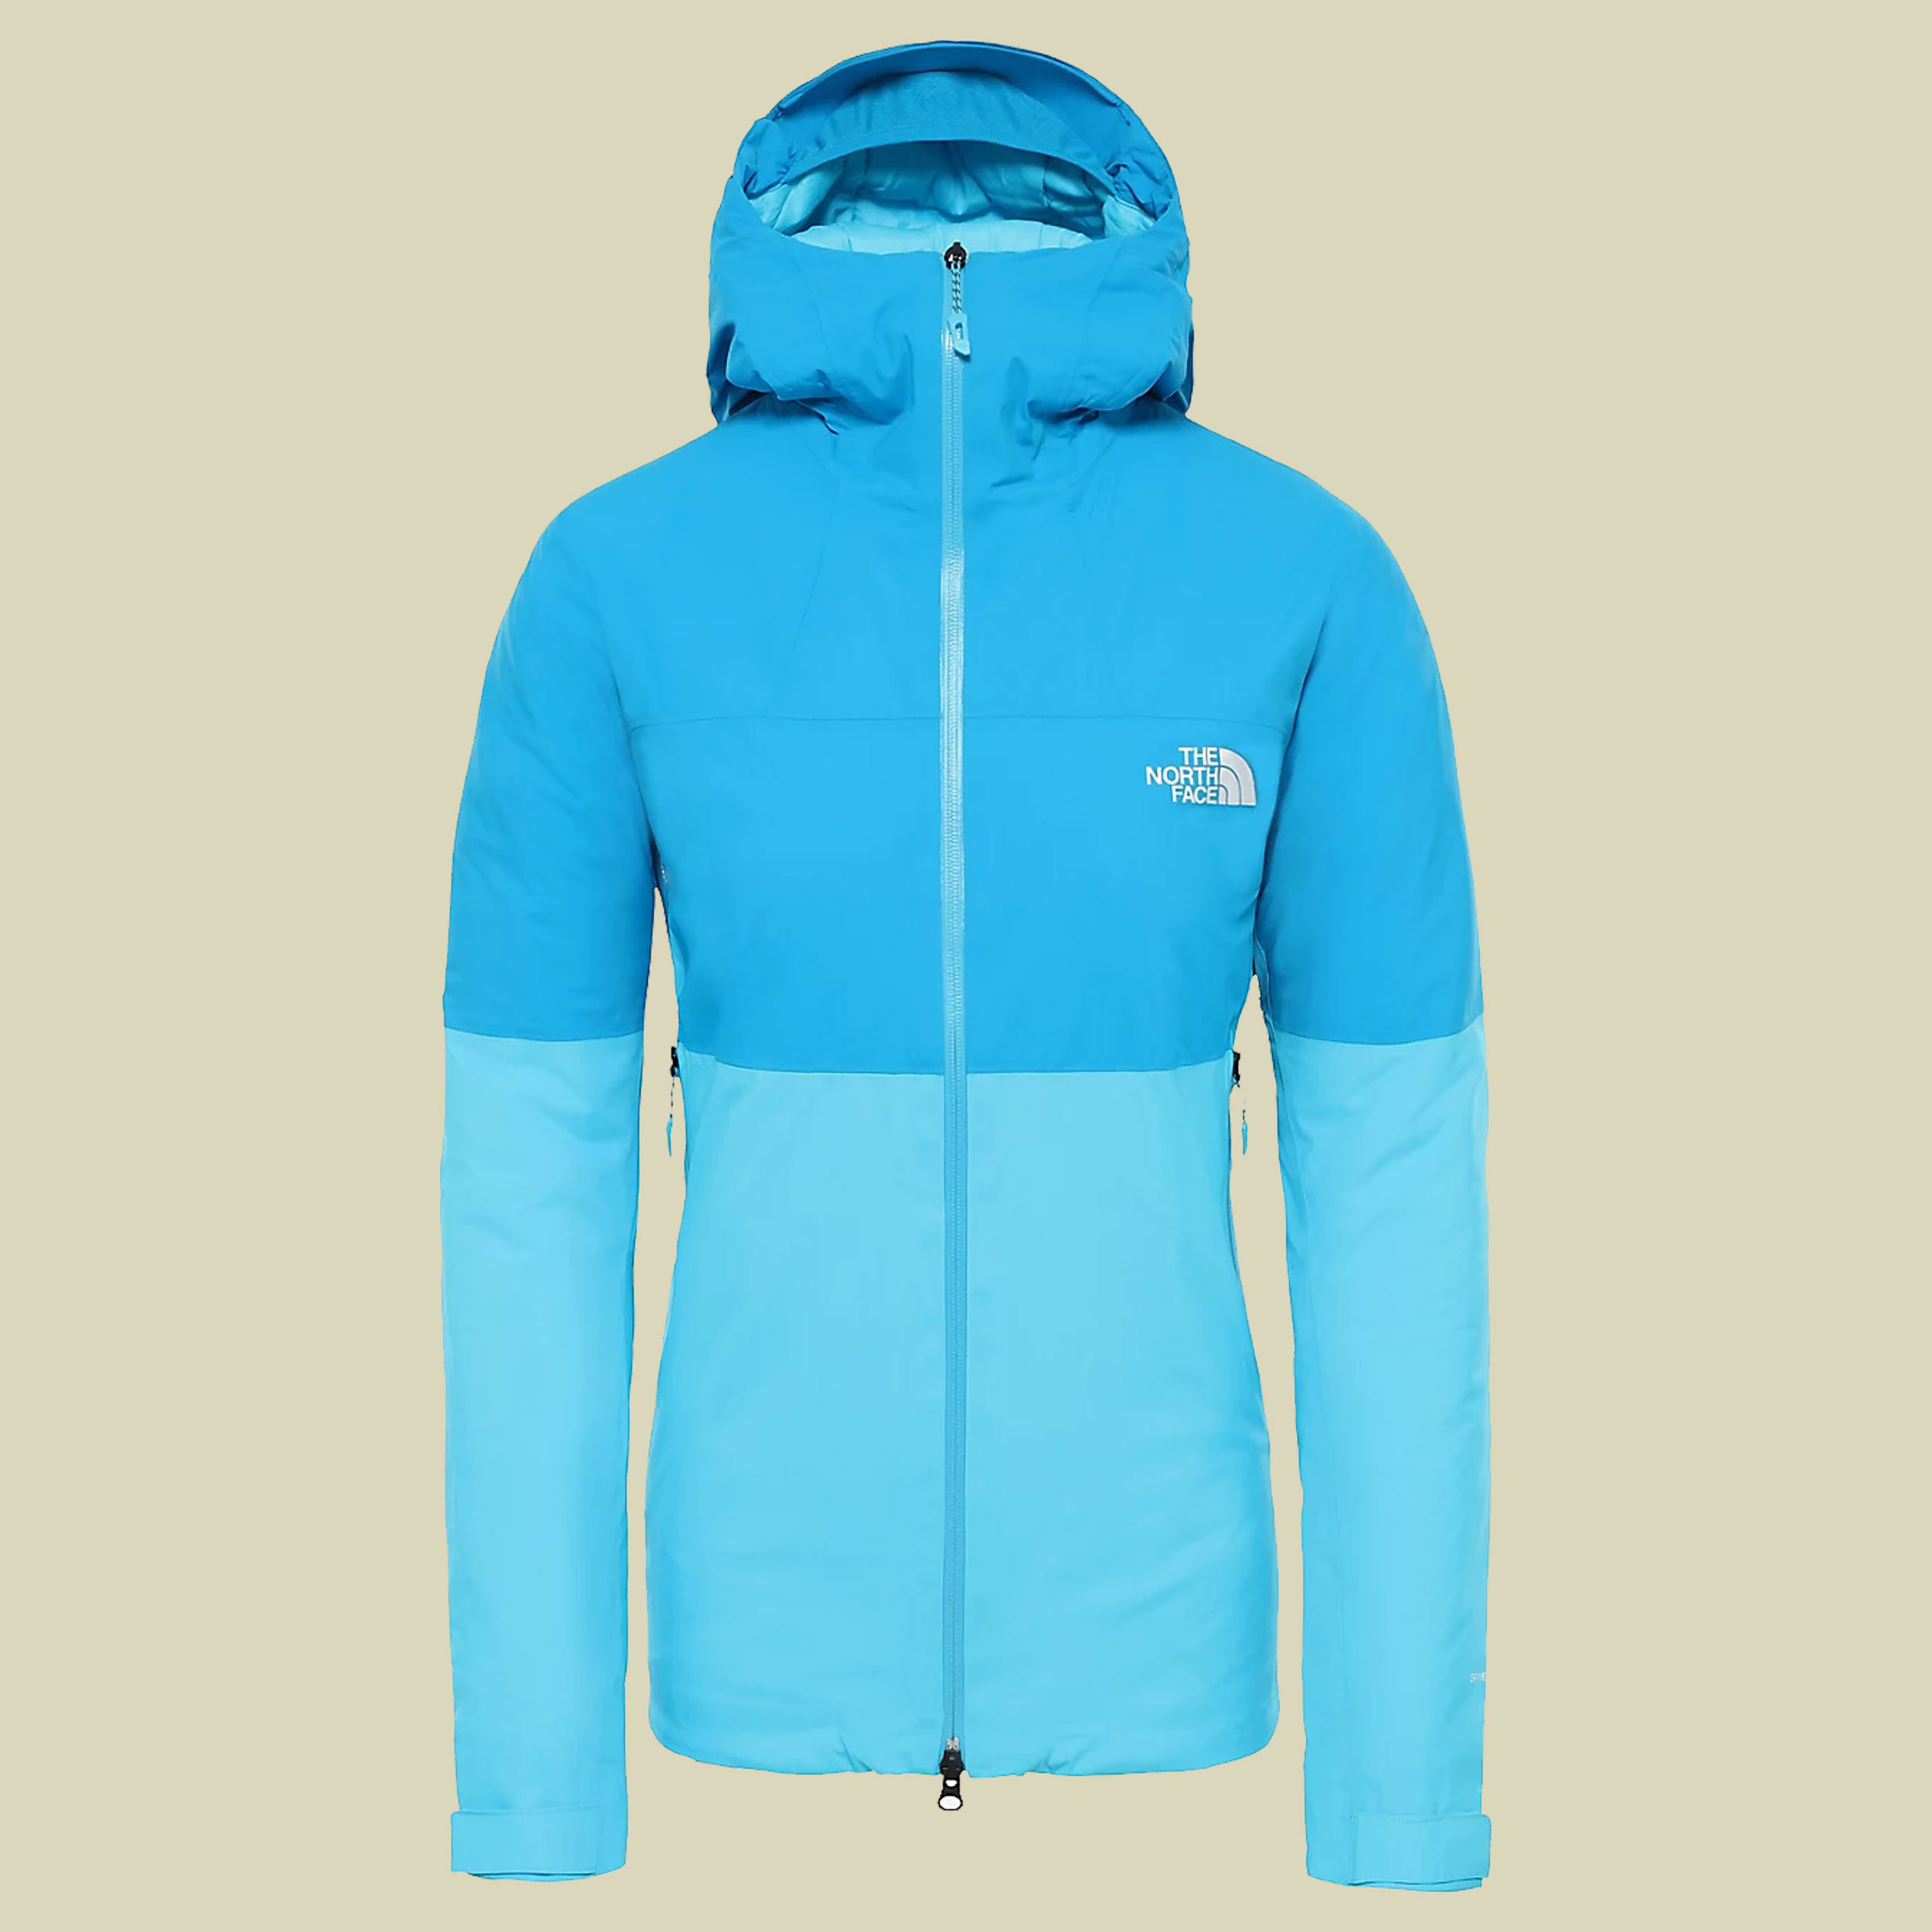 Impendor Insulated Jacket Women Größe M Farbe turquoise blue